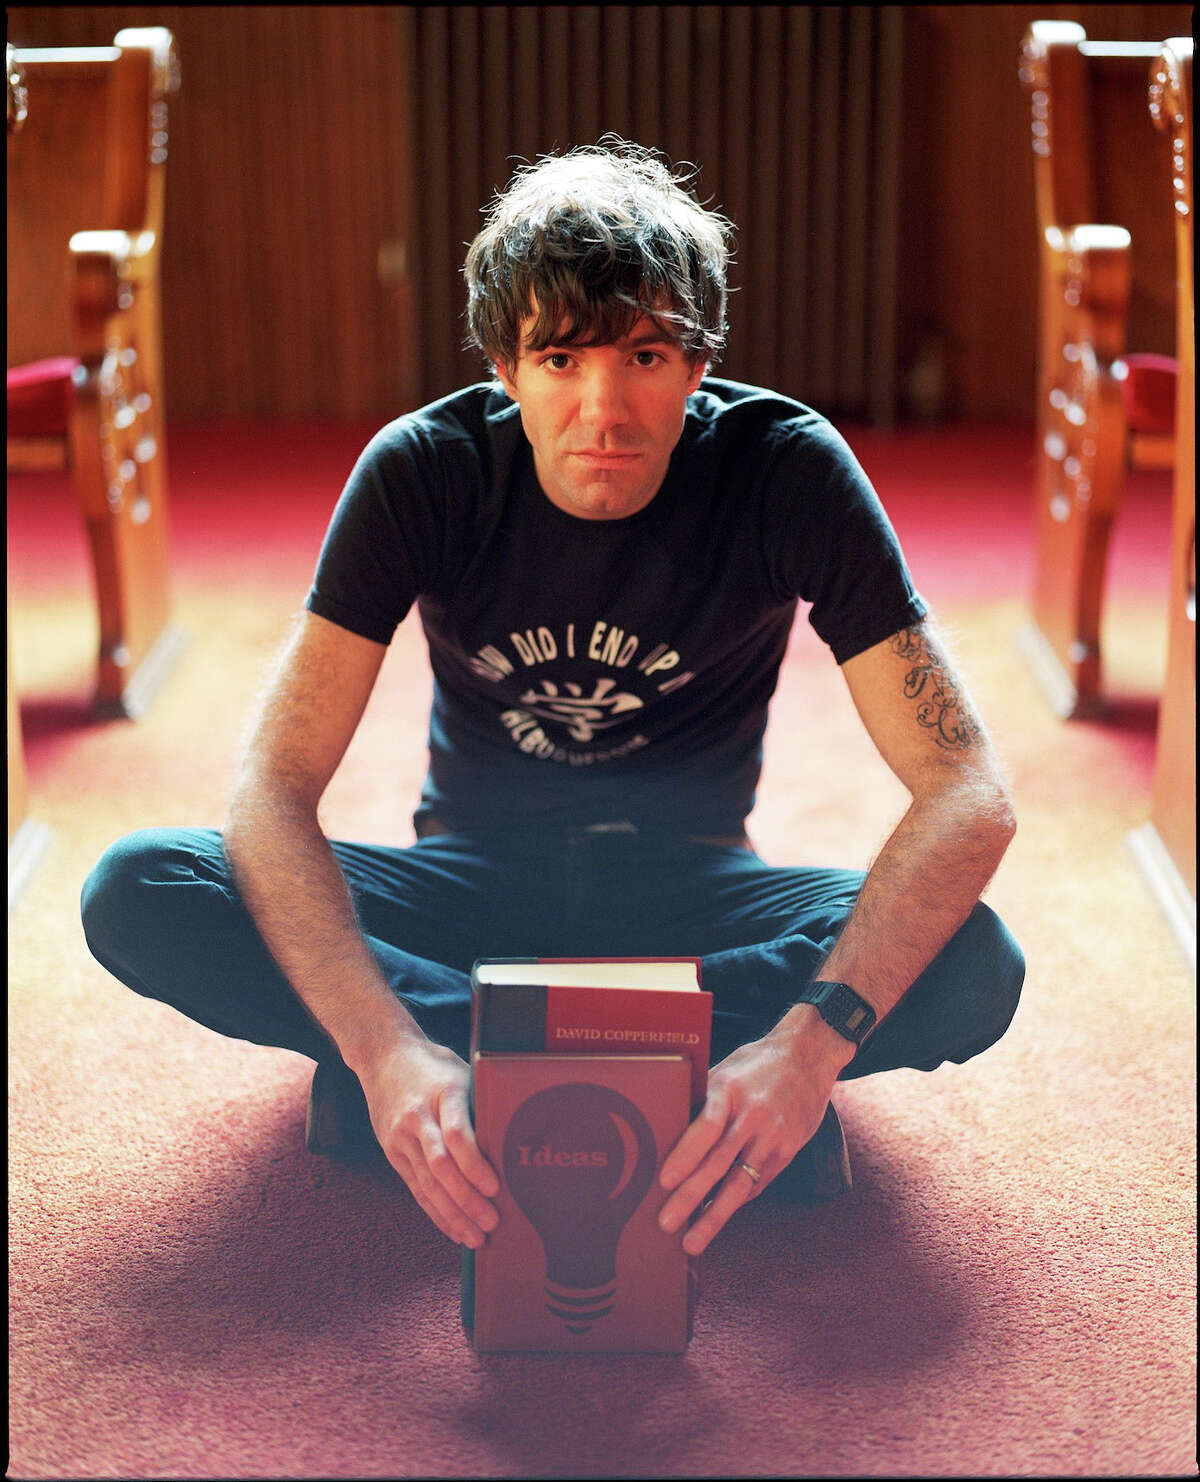 Stephen Kellogg band performs at Fairfield Theatre Company on Saturday, March 8.